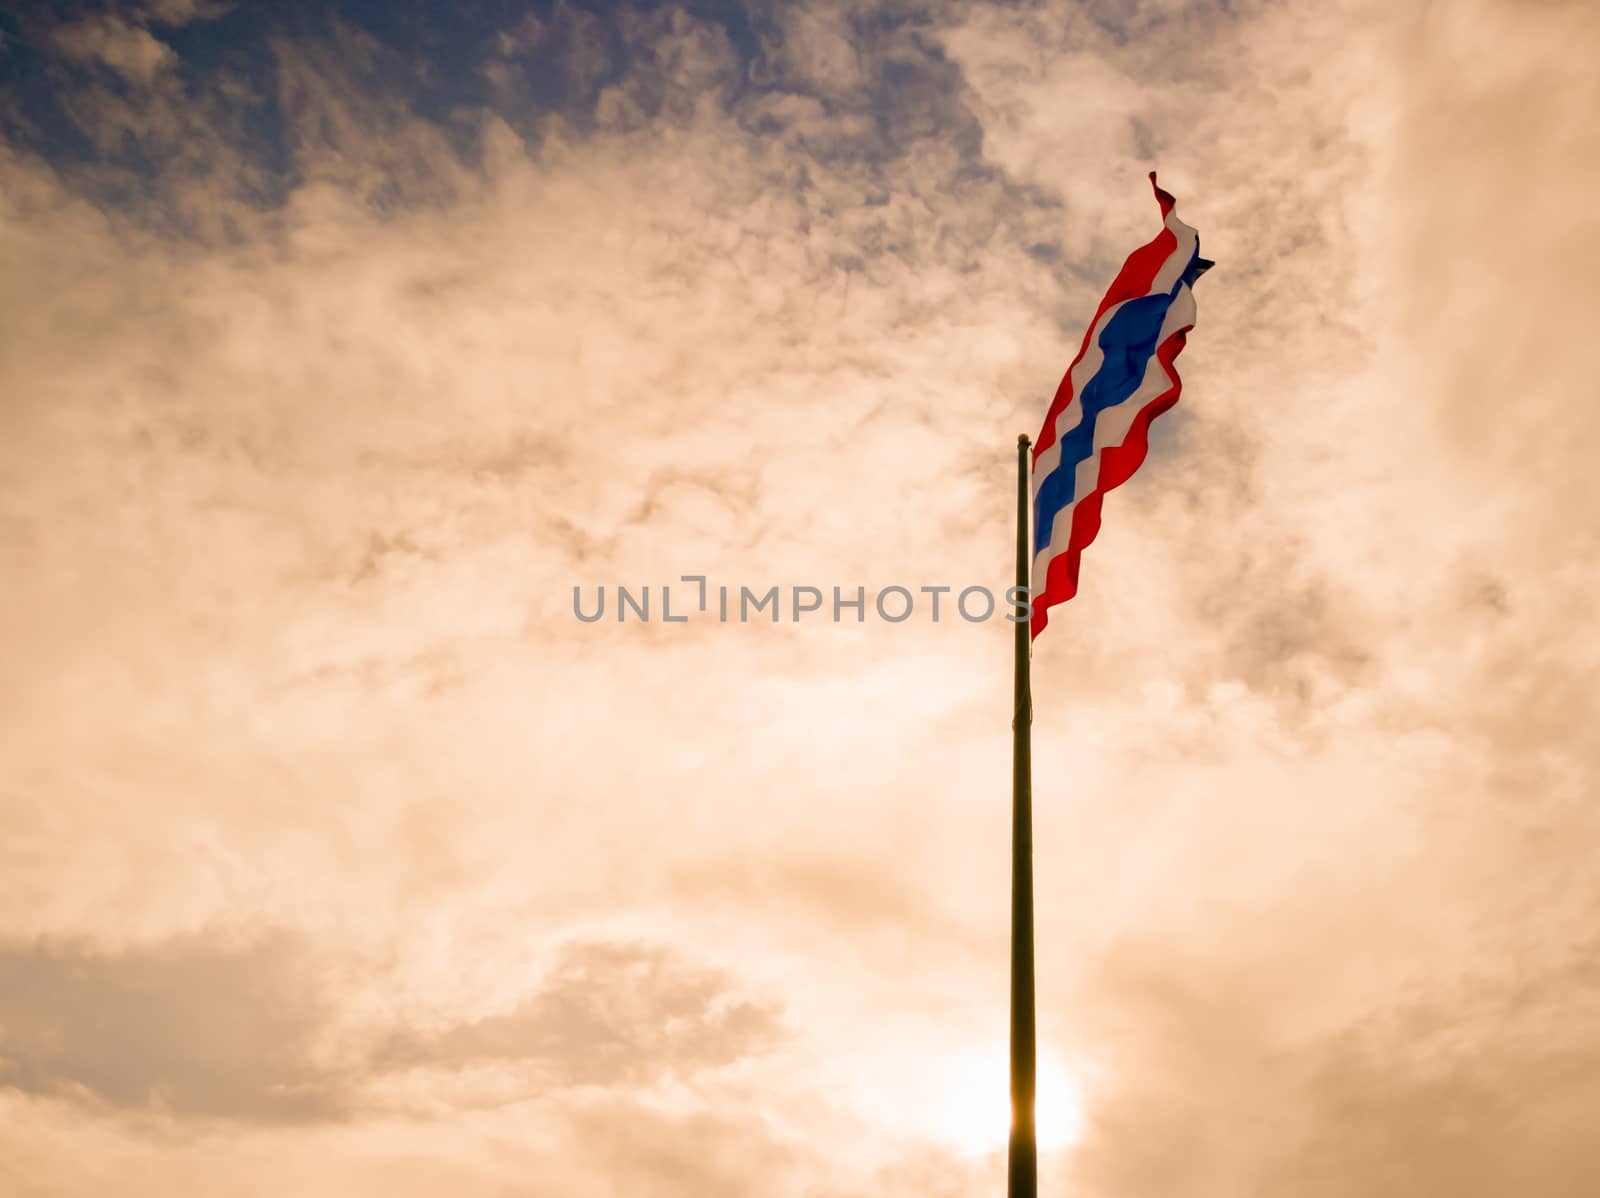 The sunrise sky with Thai flag blowing in the wind